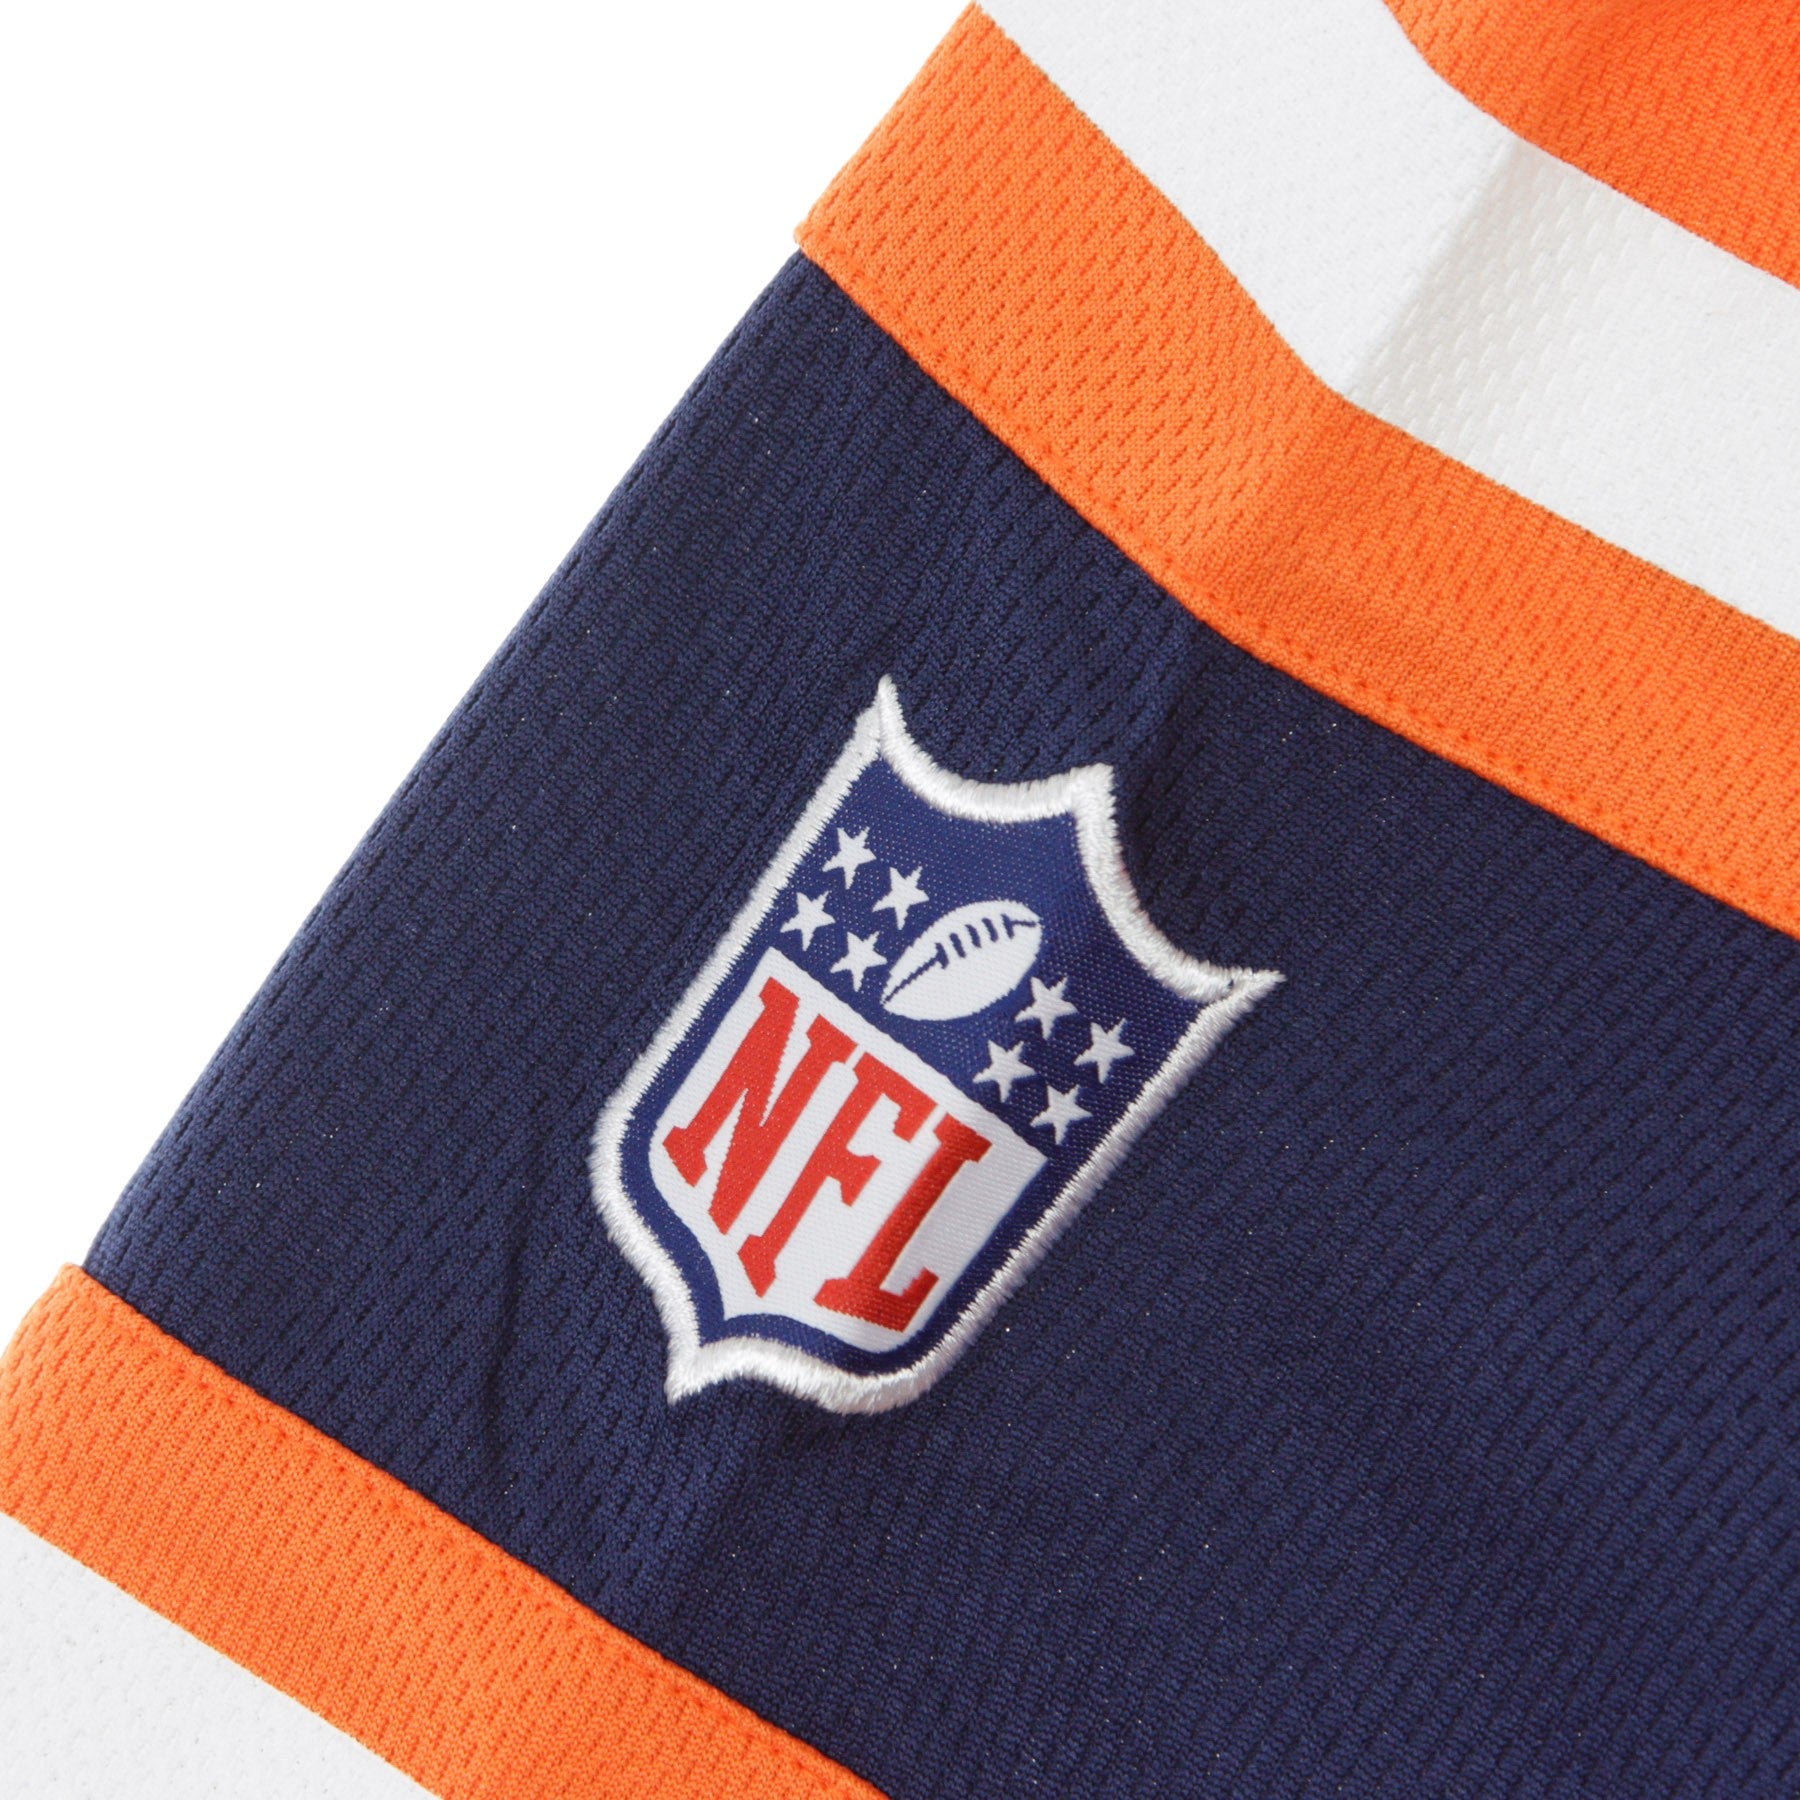 Men's T-Shirt Nfl Iconic Franchise Poly Mesh Supporters Jersey Denbro